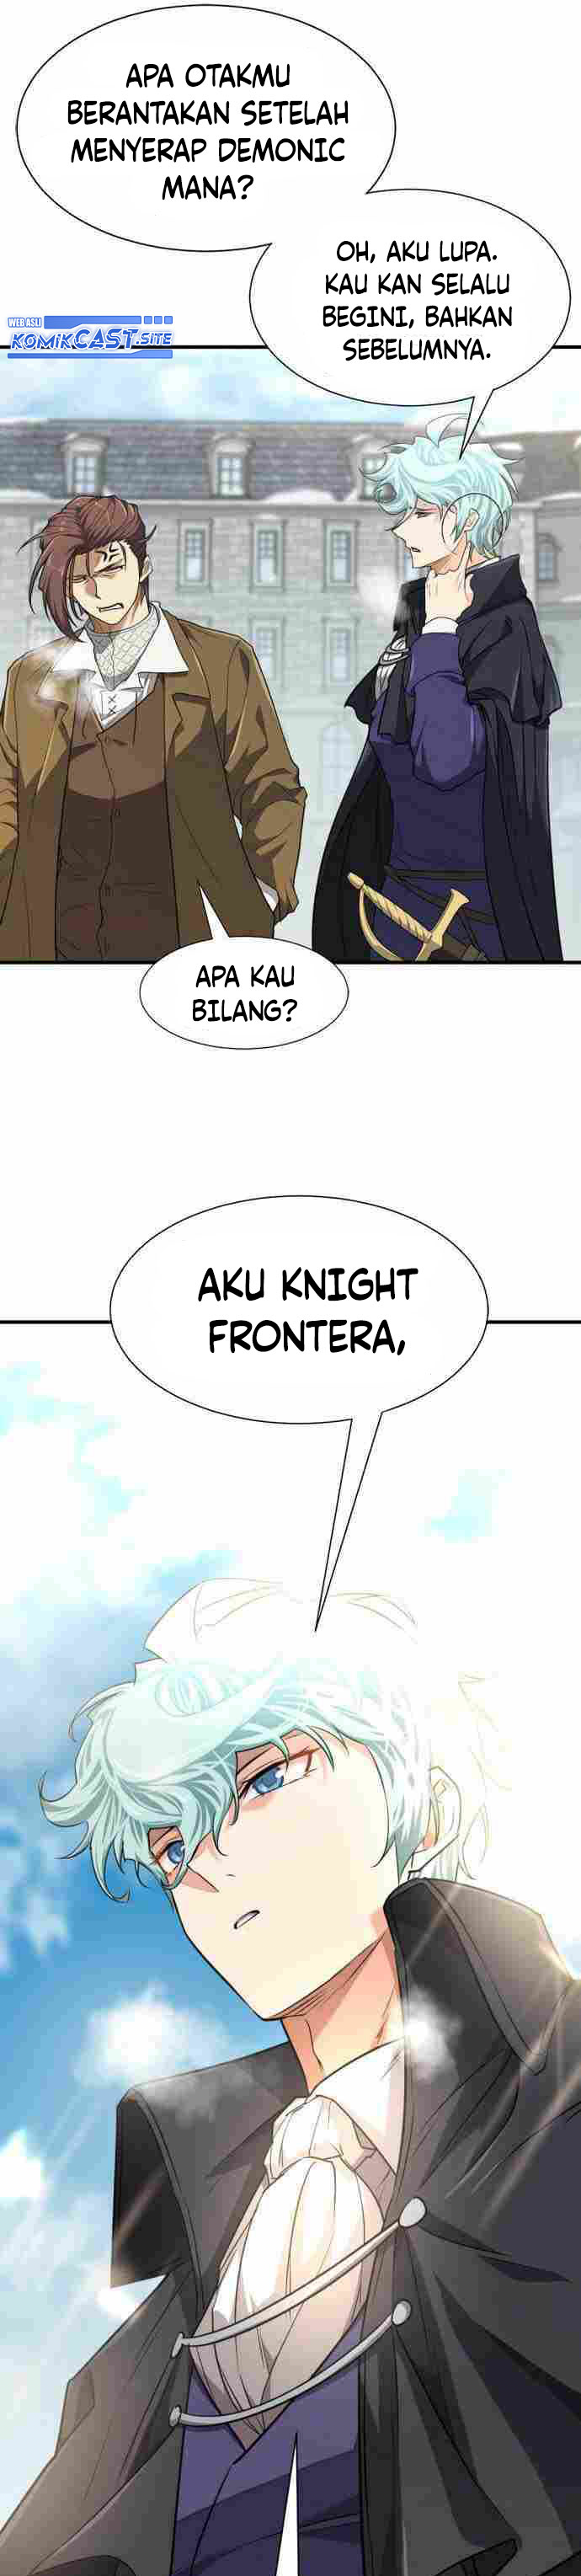 The World’s Best Engineer Chapter 91